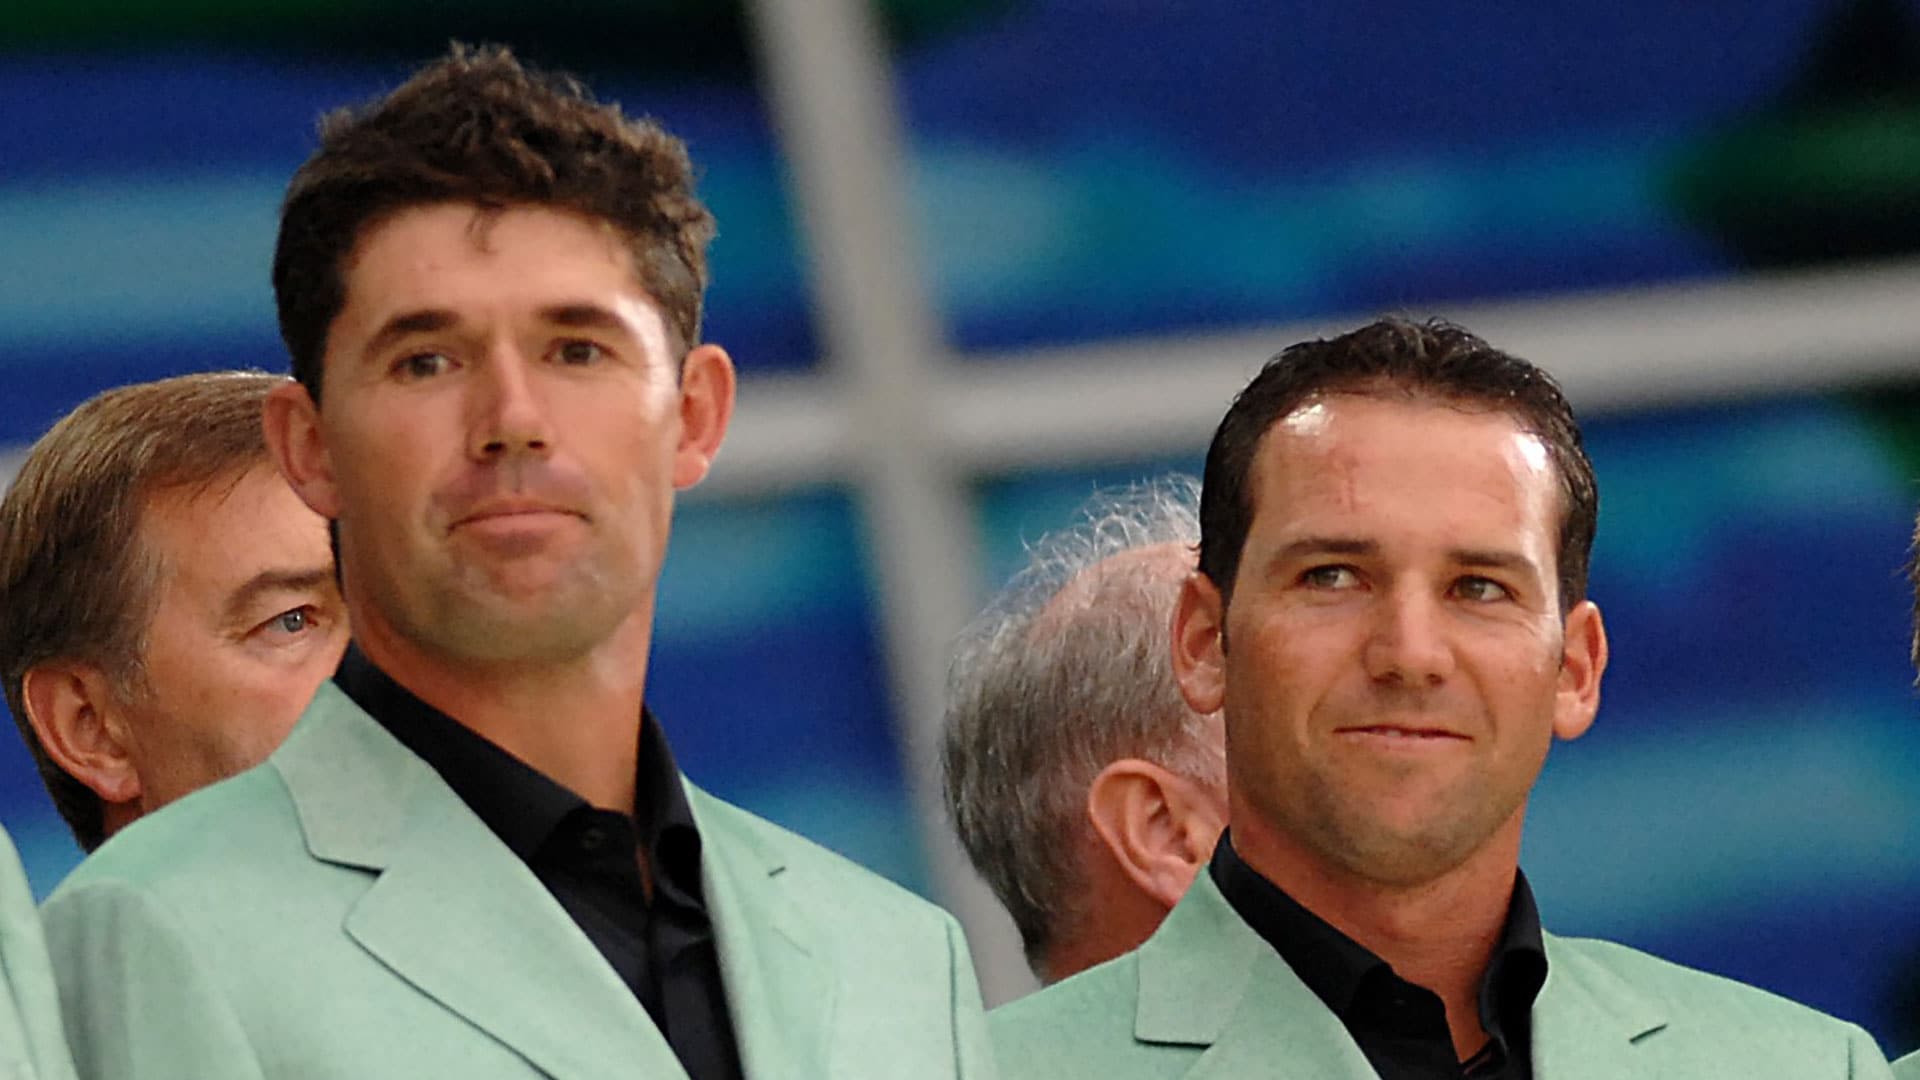 Captain Harrington on being underdogs, relationship with Sergio and more